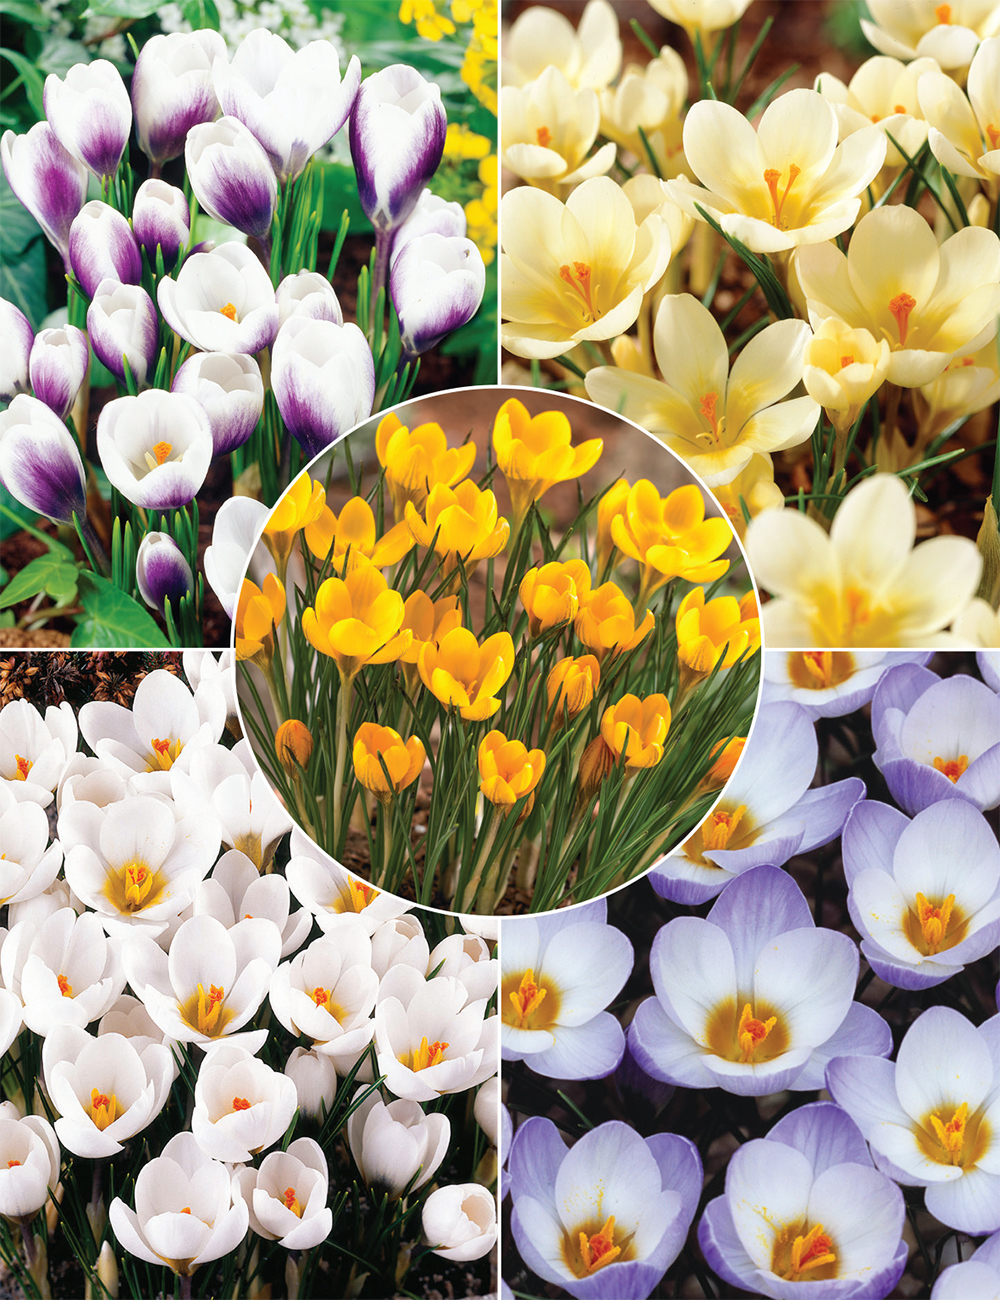 Snow Crocus (reduced) Collection